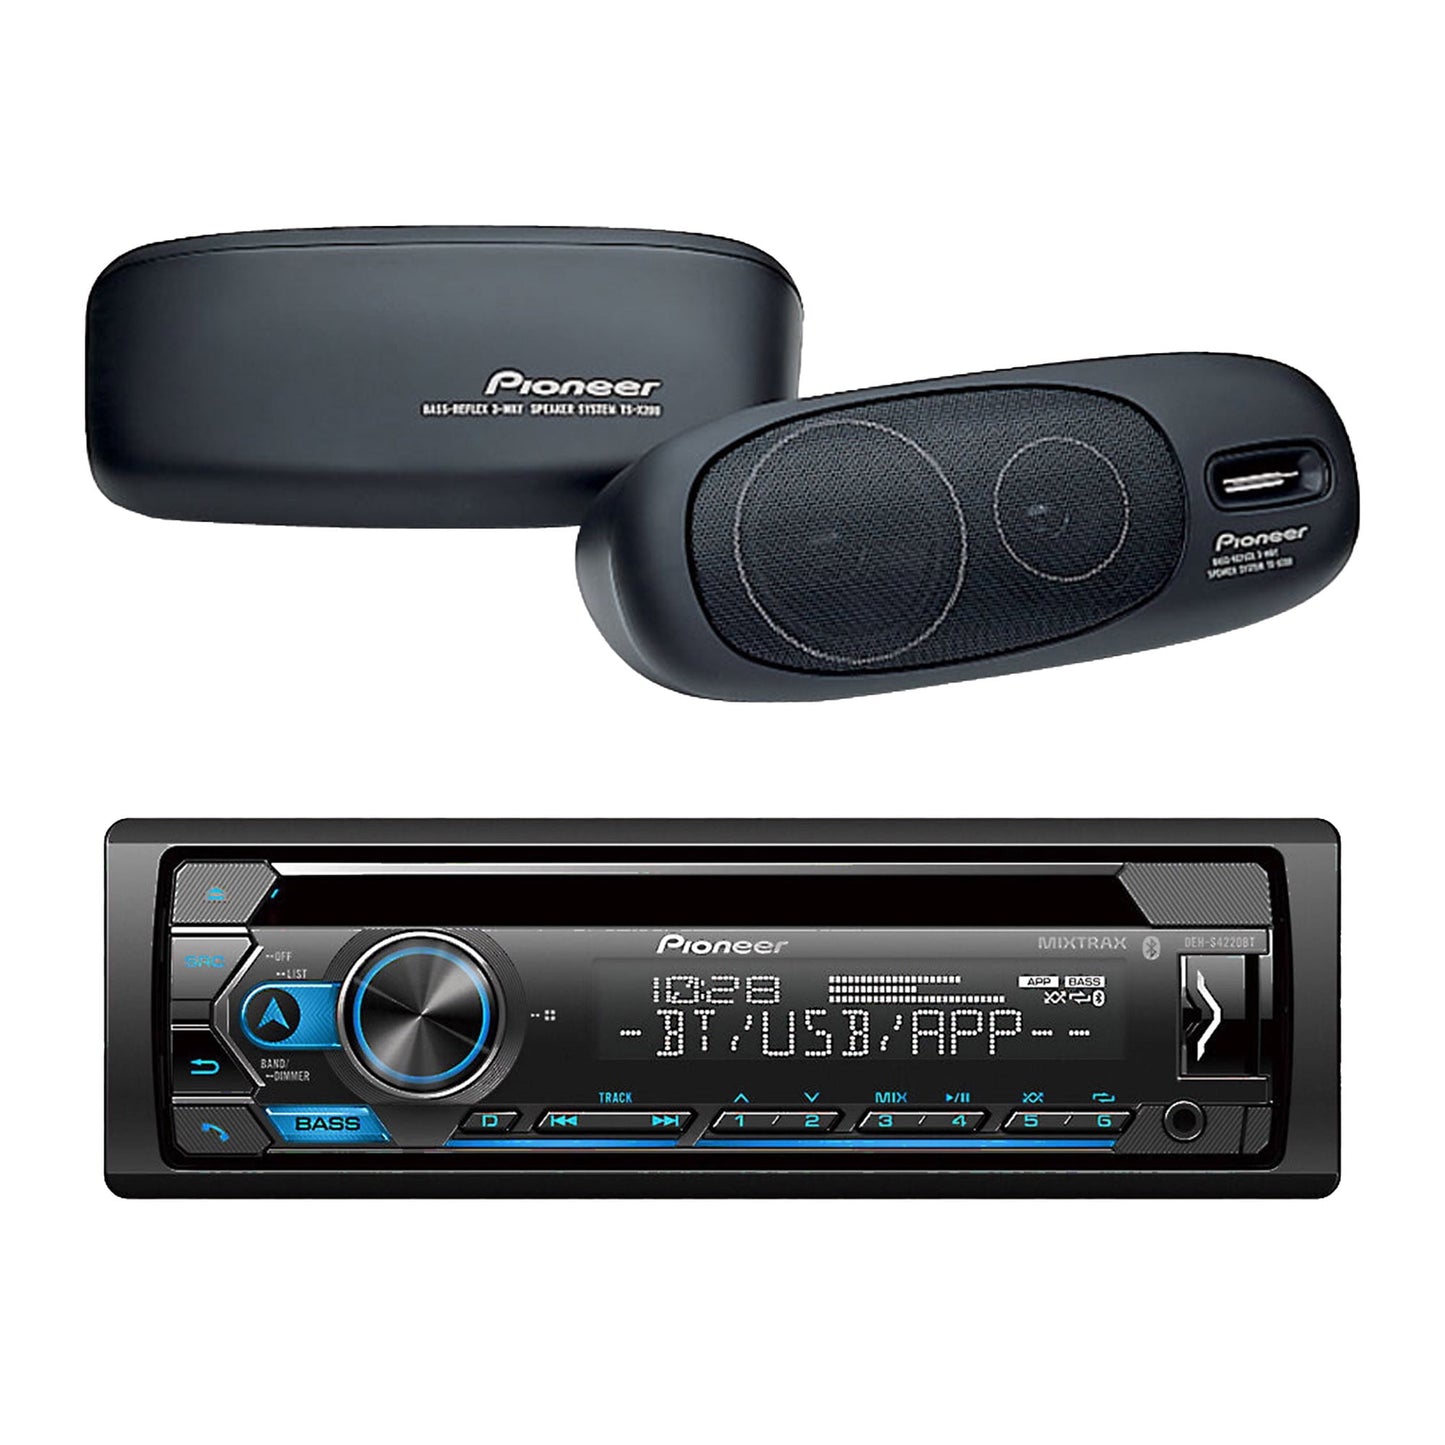 Pioneer DEH-S4220BT In-dash CD with Amazon Alexa, Pioneer Smart Sync App, Bluetooth and 1 Pair of Pioneer TS-X200 - 3-Way Surface Mount Speaker